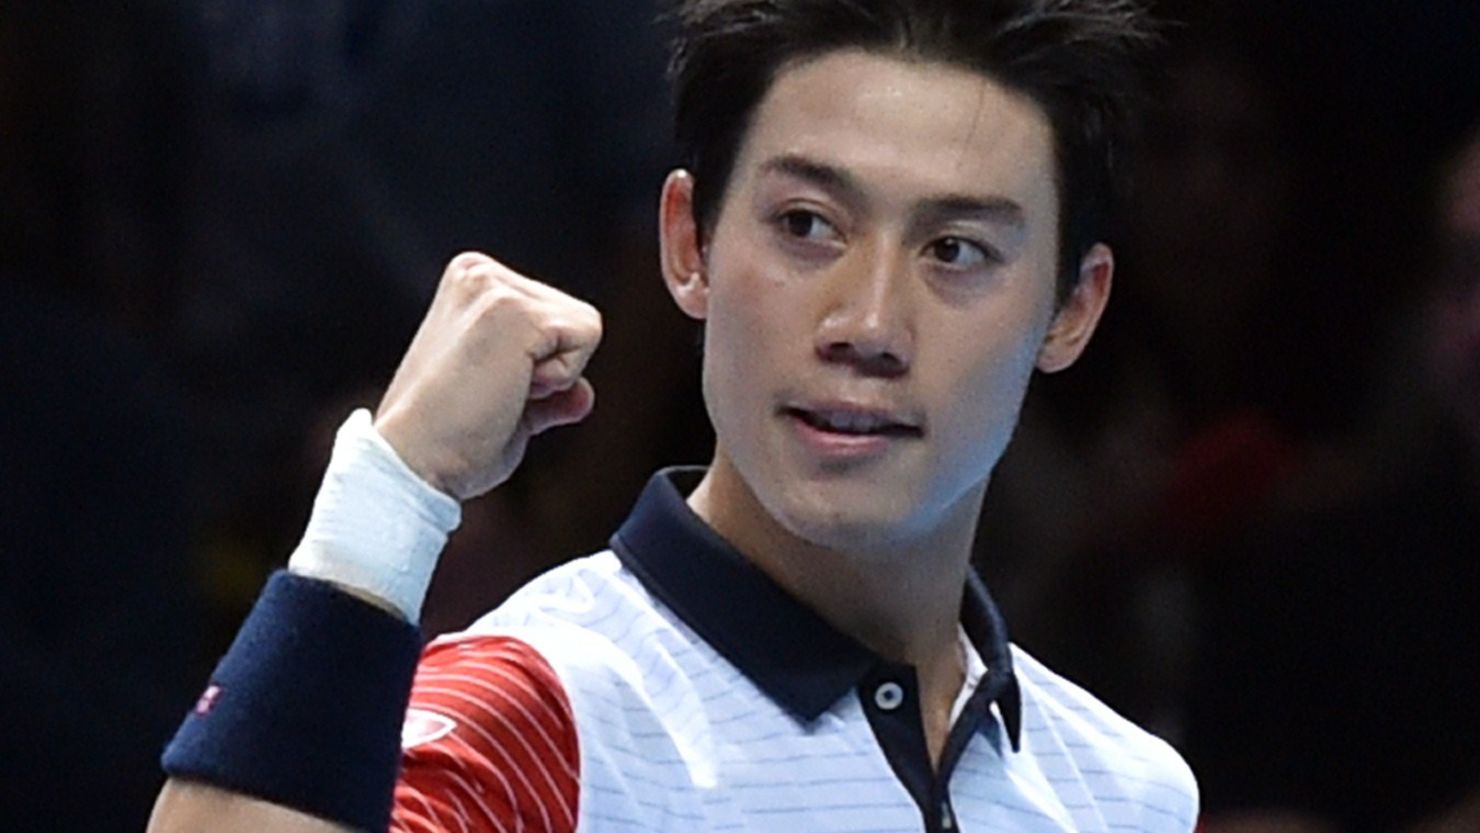 Kei Nishikori made a winning debut at the ATP World Tour Finals as he dispatched Andy Murray in straight sets.